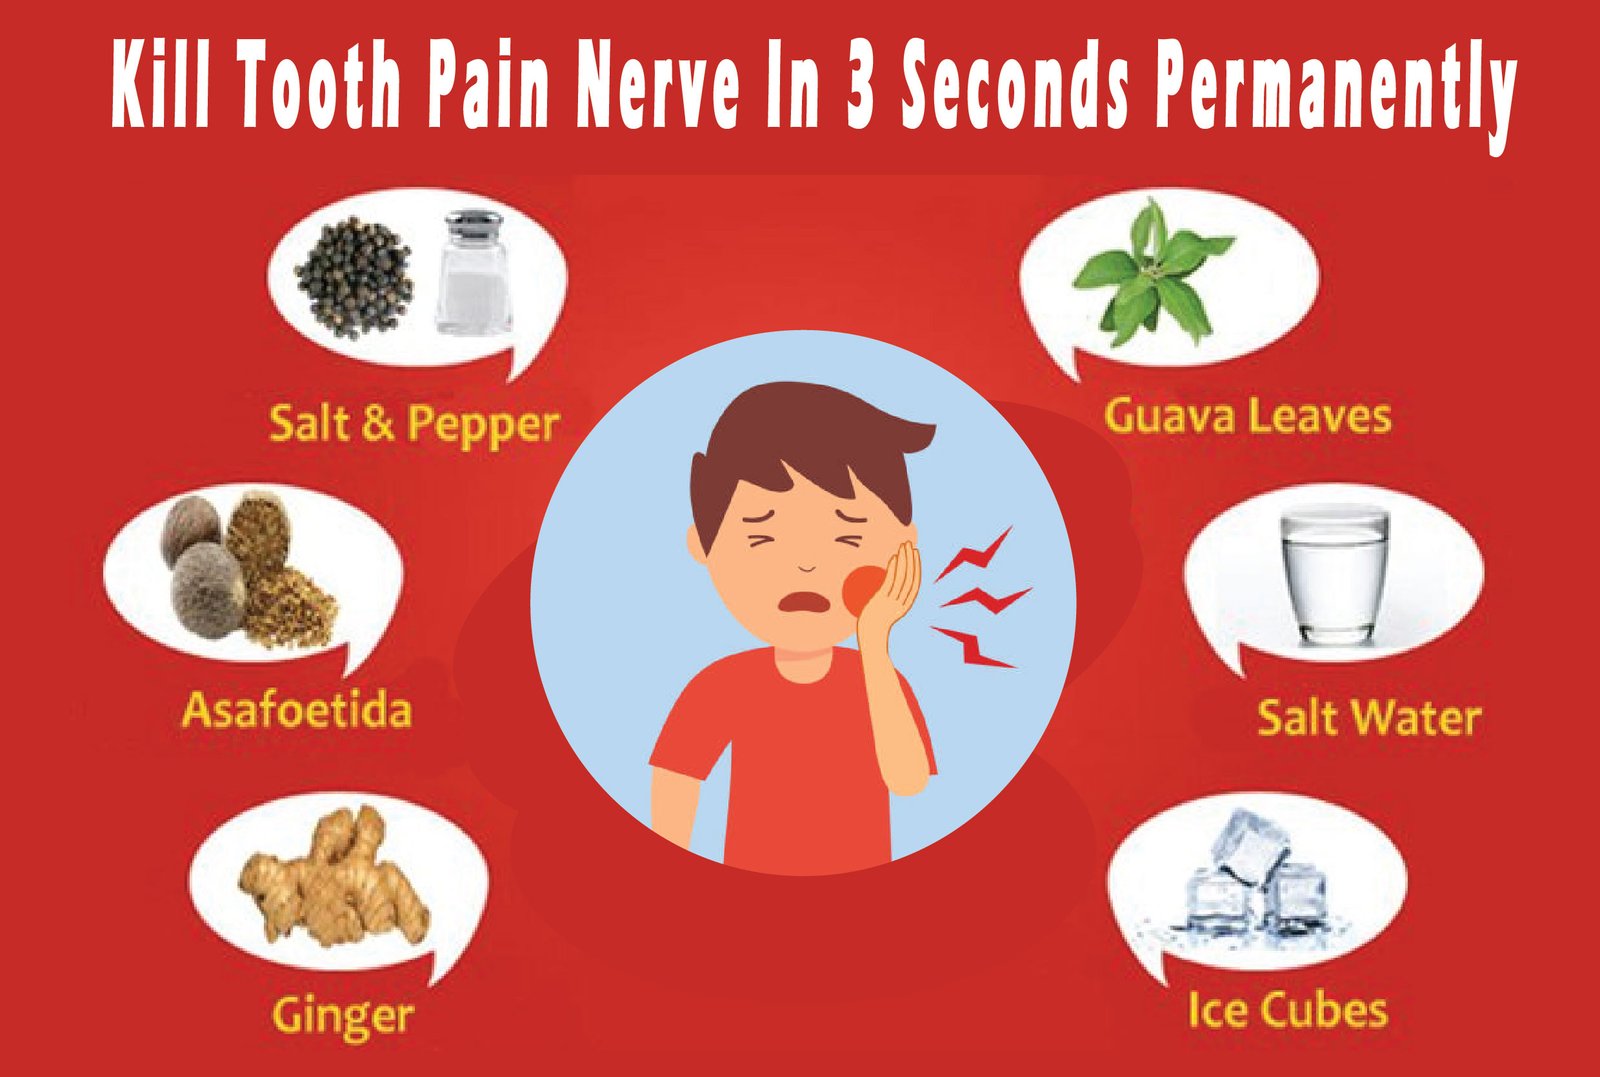 Kill Tooth Pain Nerve In 3 Seconds Permanently!